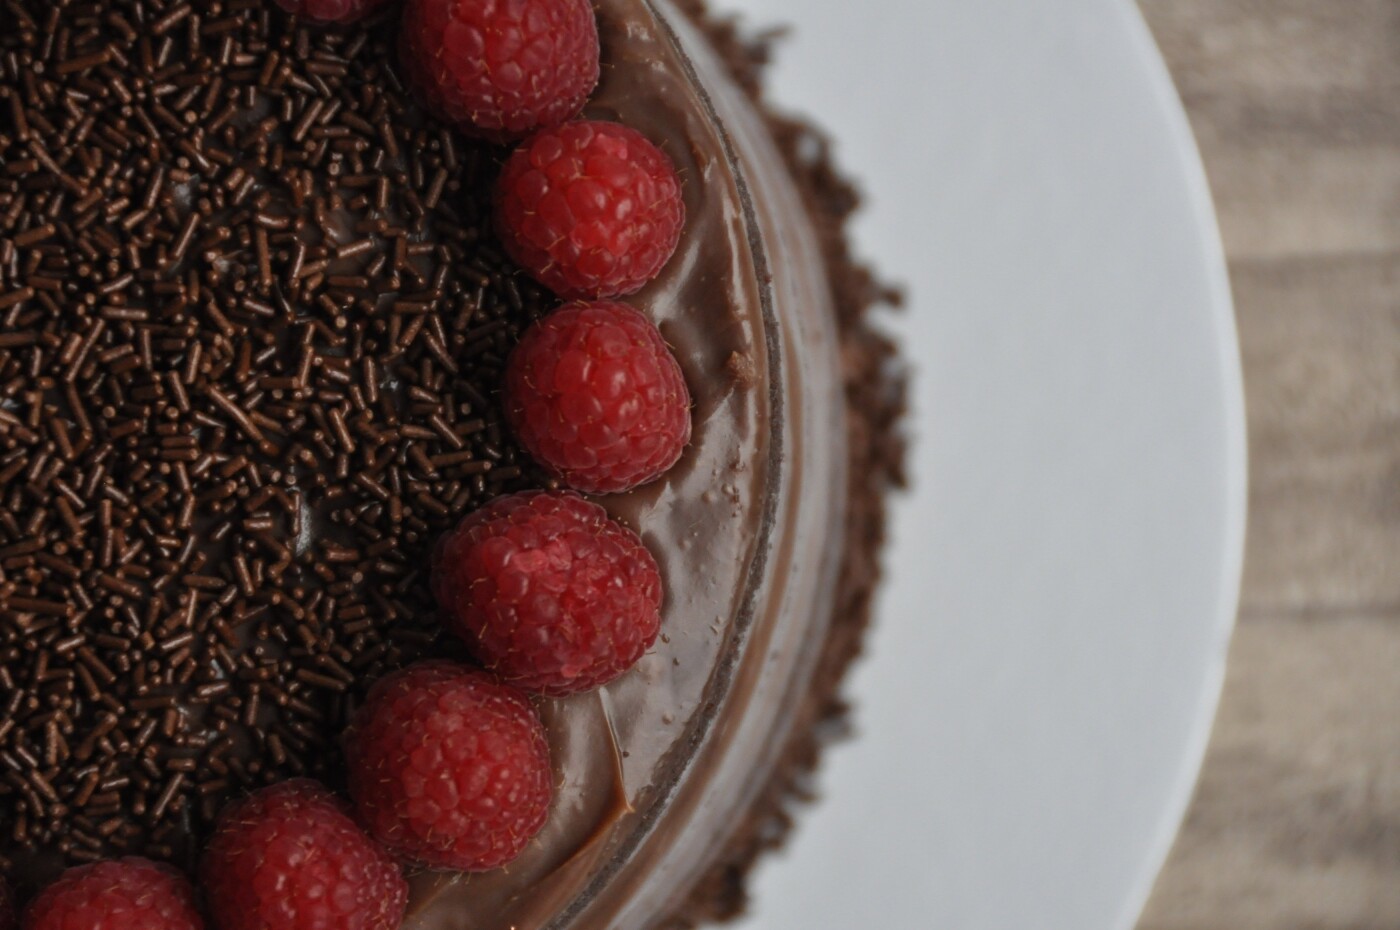 This is a chocolate cake, with chocolate filling, chocolate sprinkles and fresh raspberries. It was specially ordered for the 50th birthday of a friend. It is a simple cake, although with a strong punch of chocolate intense sweetness and raspberry fresh bitterness!